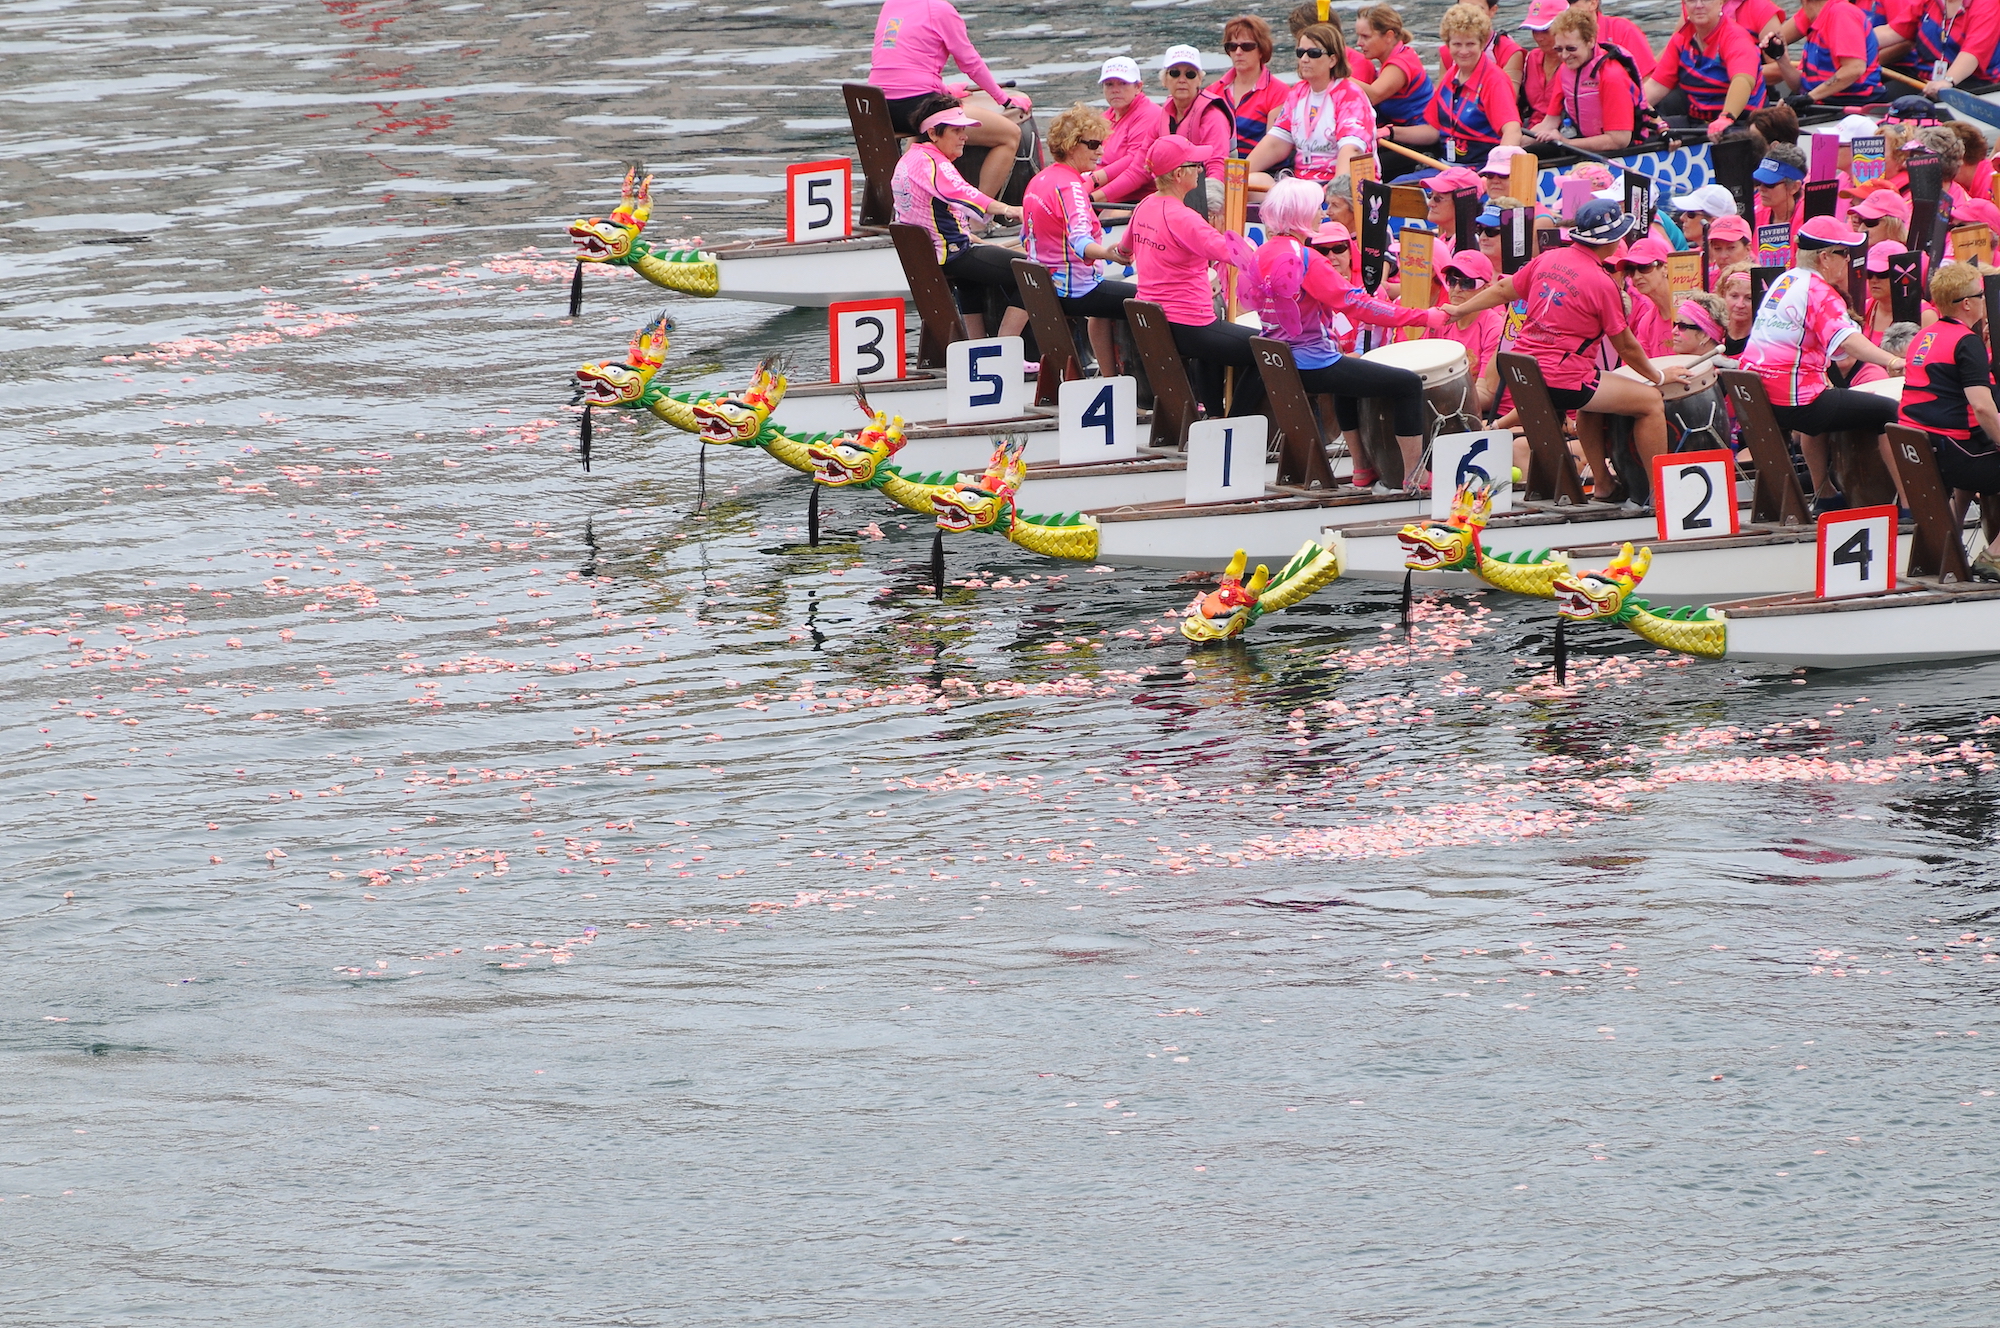 dragons-abreast-brisbane-dragon-boating-for-breast-cancer-survivors-chinese-dragon-boat-festival-2011-flowers-on-the-water